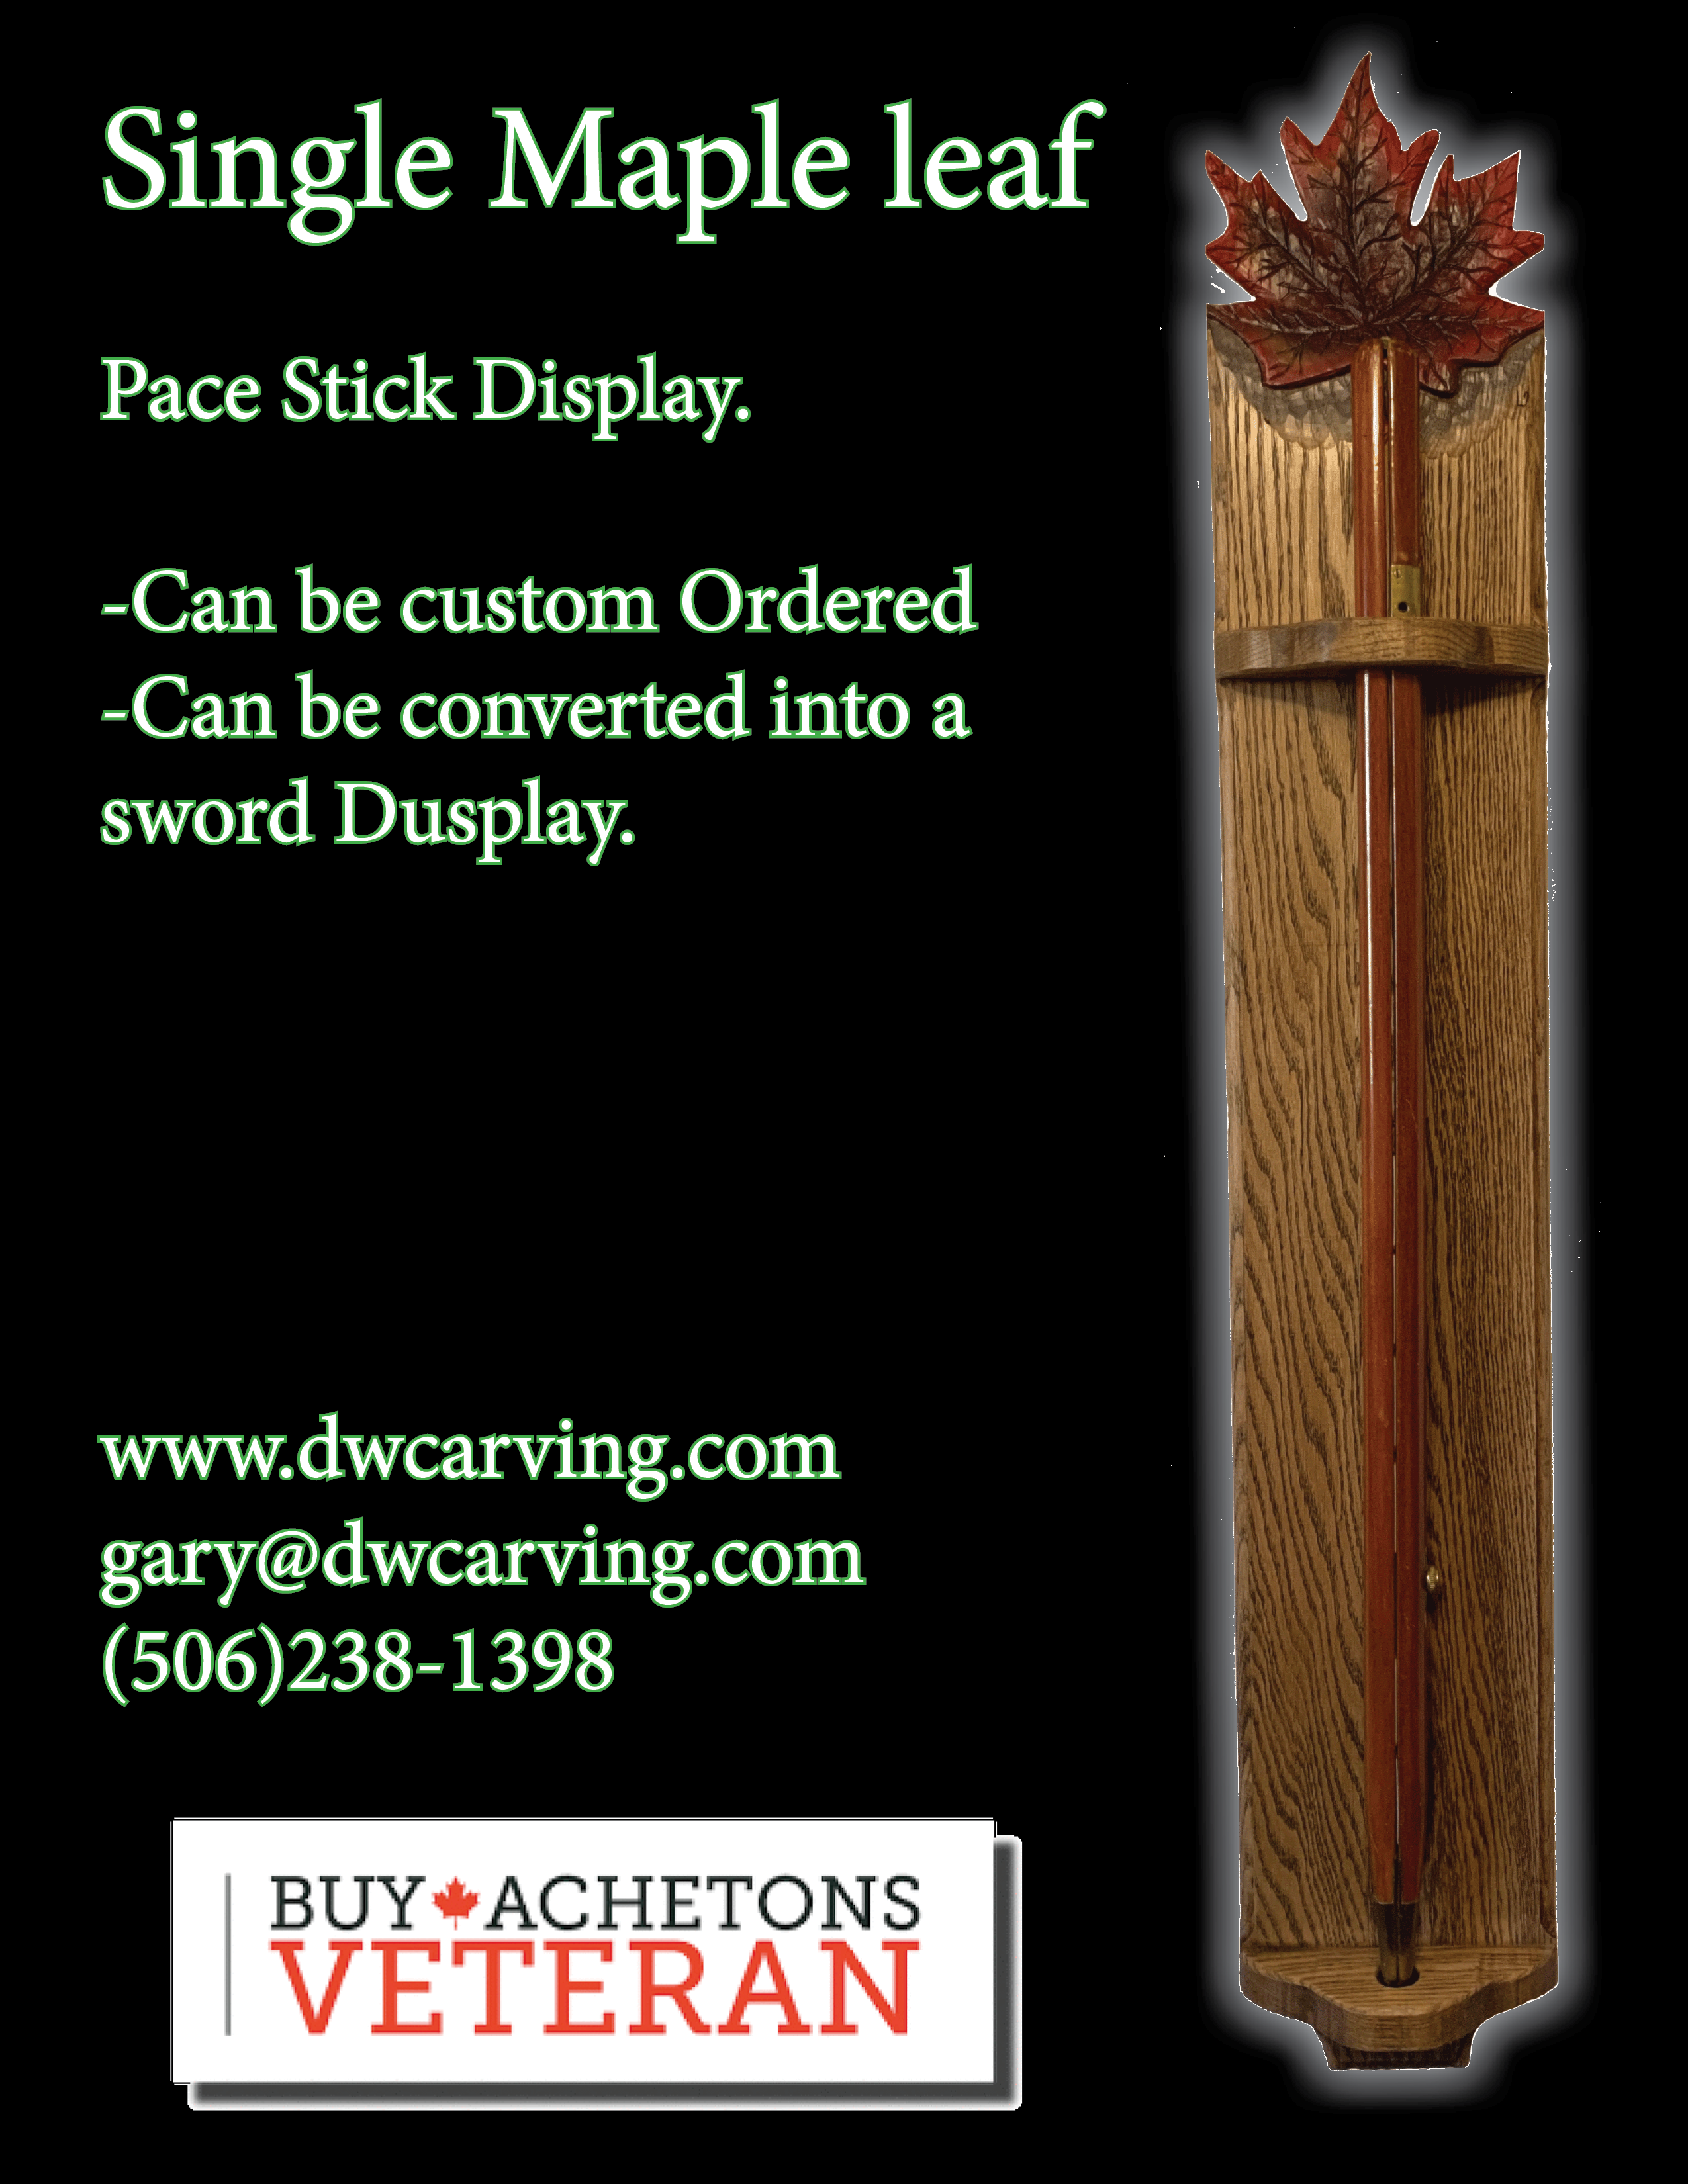 Pace Stick, Drill Cane and sword display, very coold designs, all hand made by a militay veteran, DW CArving Studio